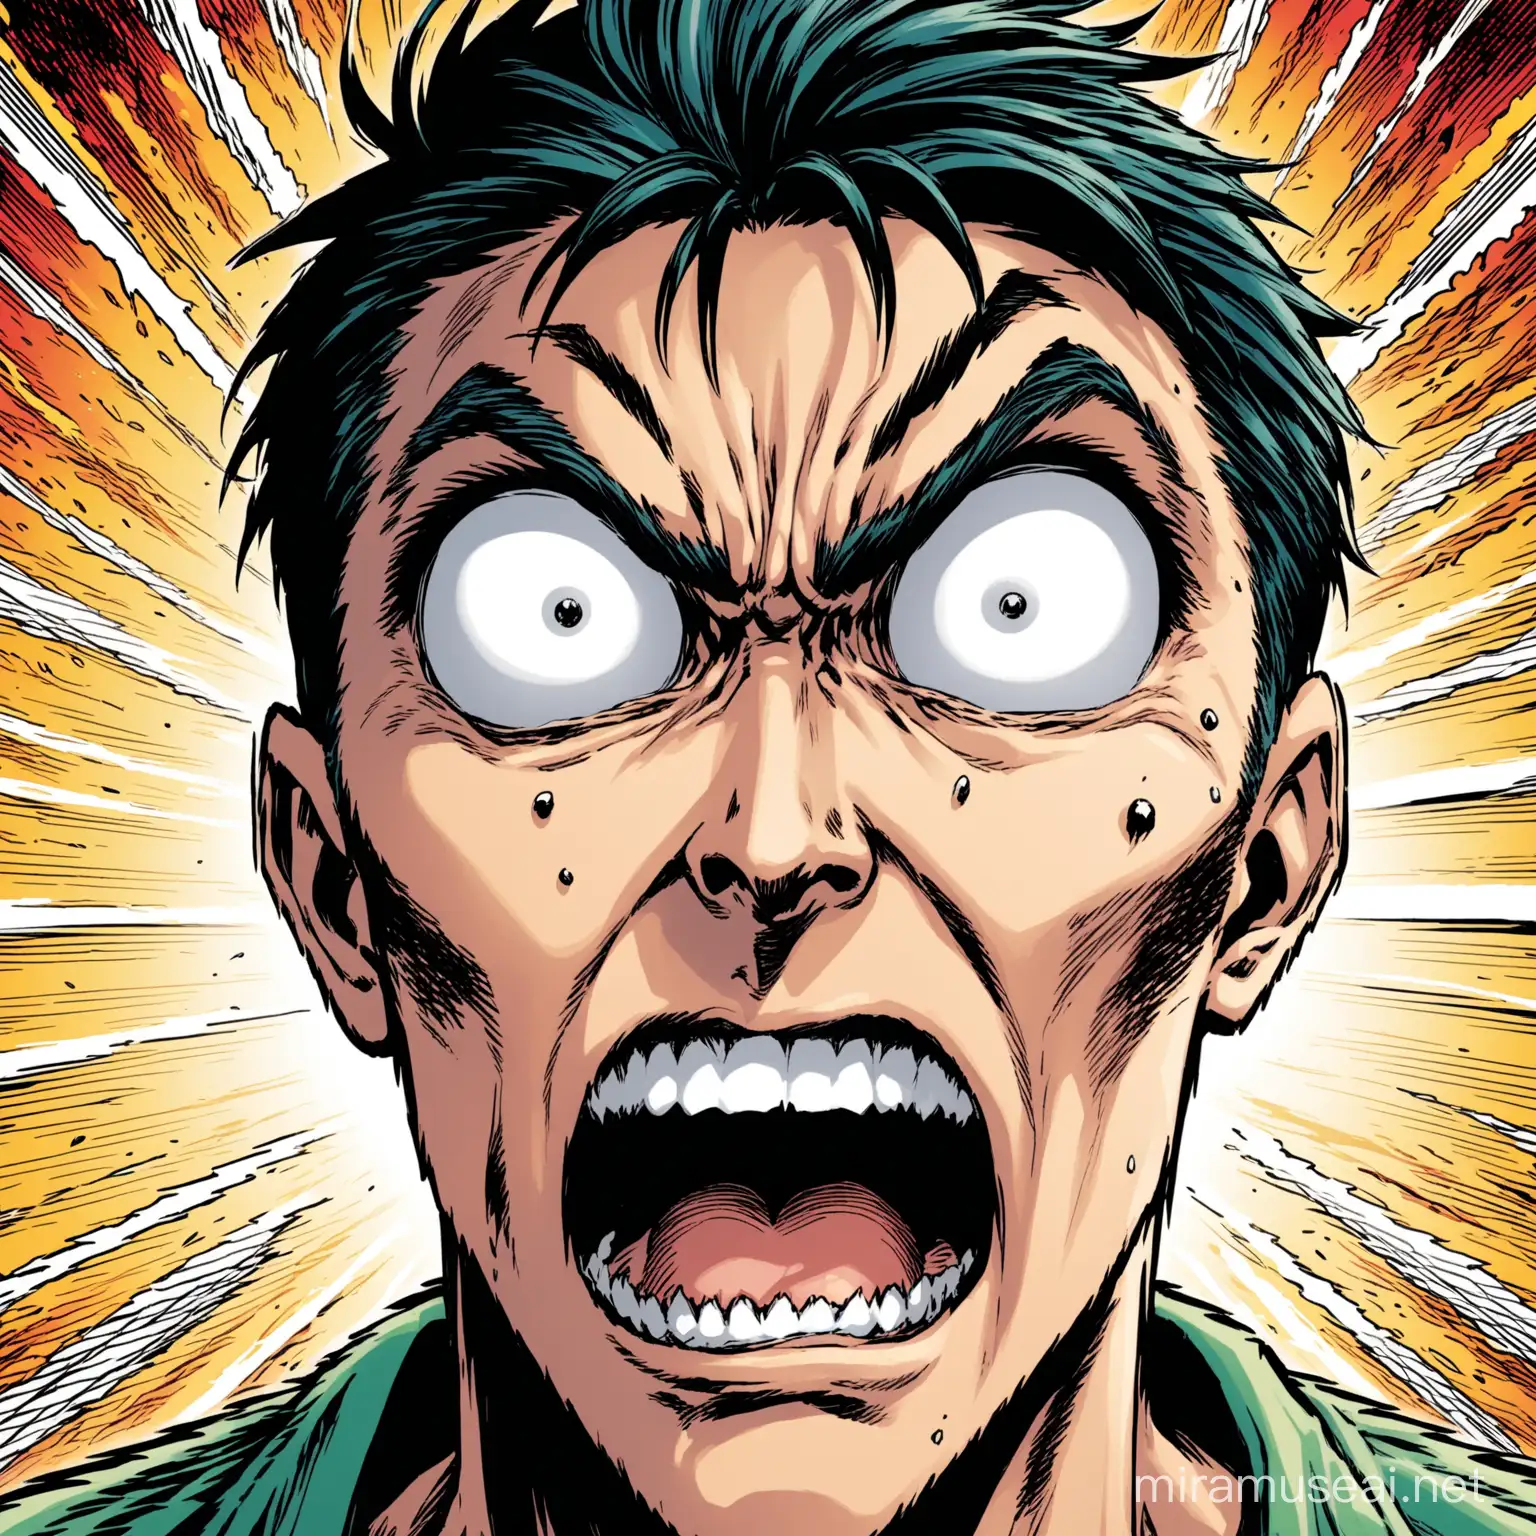 Comic Style CloseUp of a Mans Horrified Expression